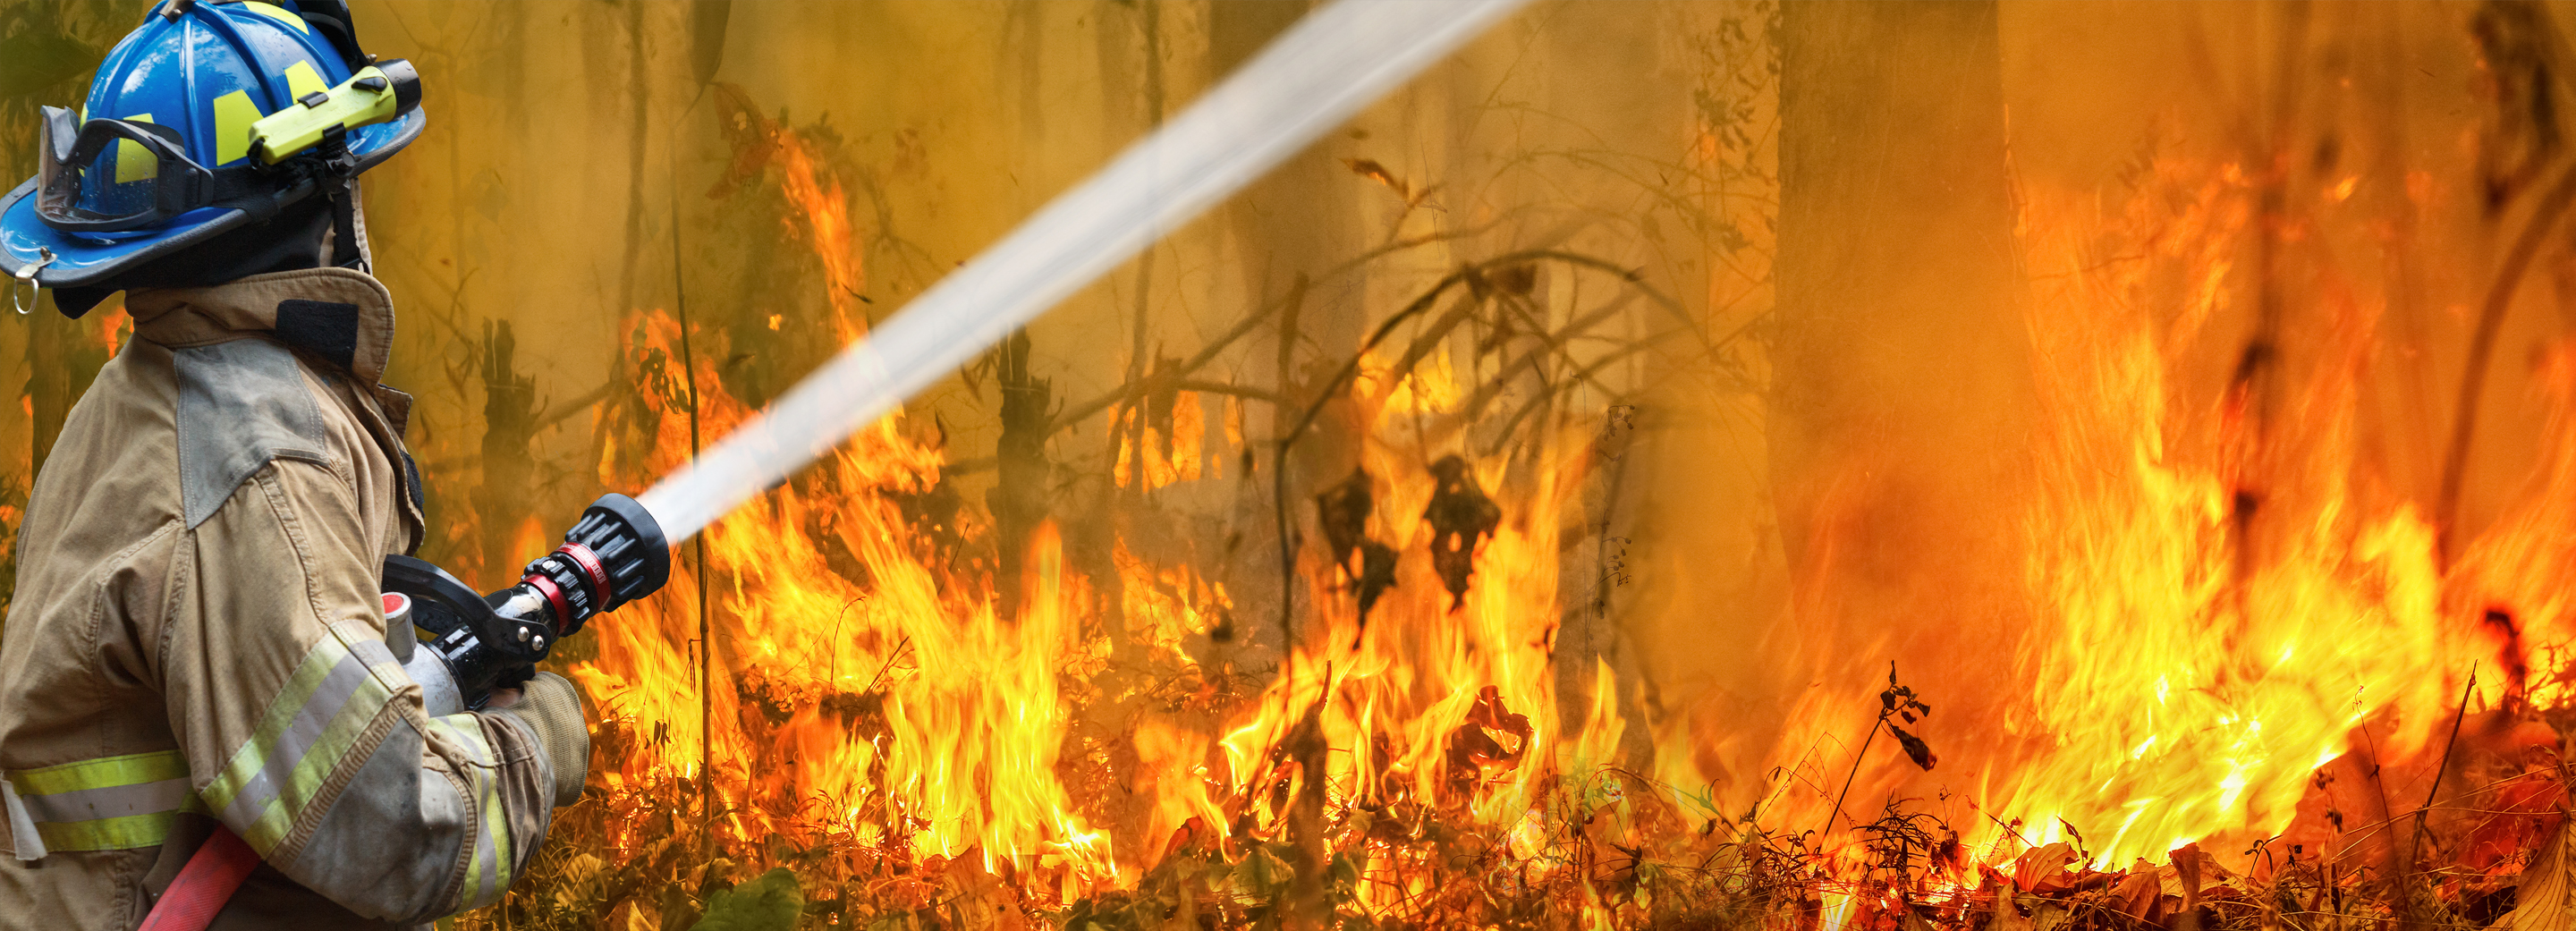 Wildfires: How They Form, and Why They're so Dangerous